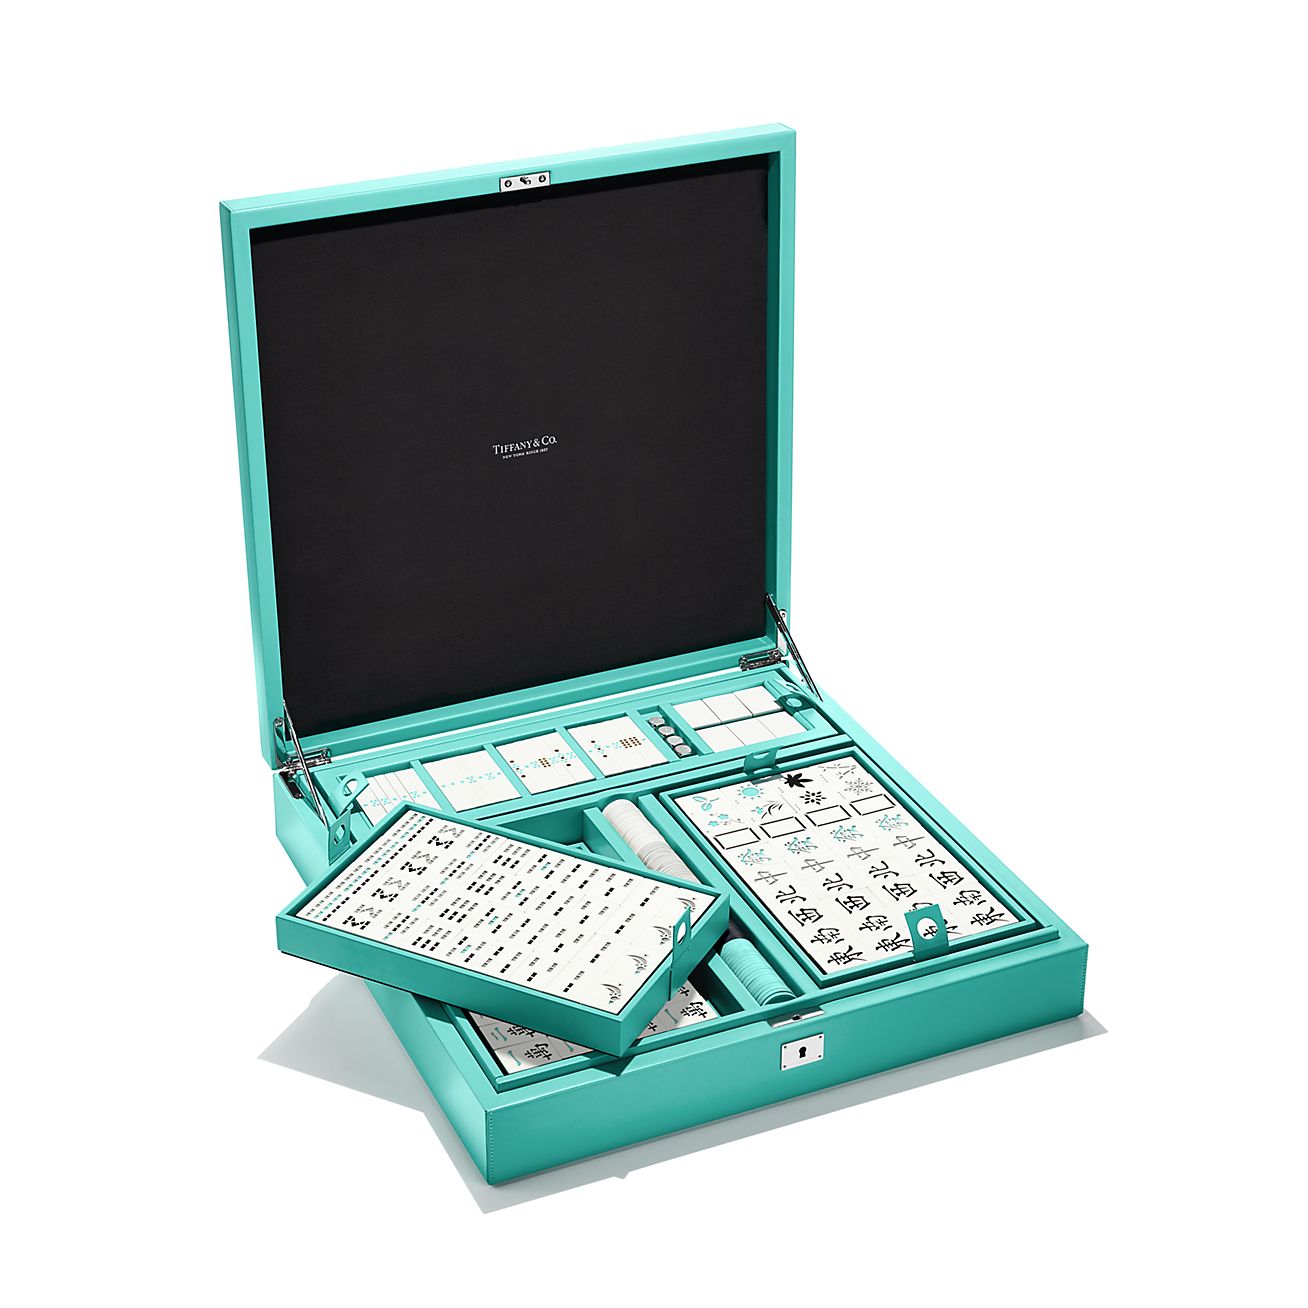 Everyday Objects mahjong set in a ...